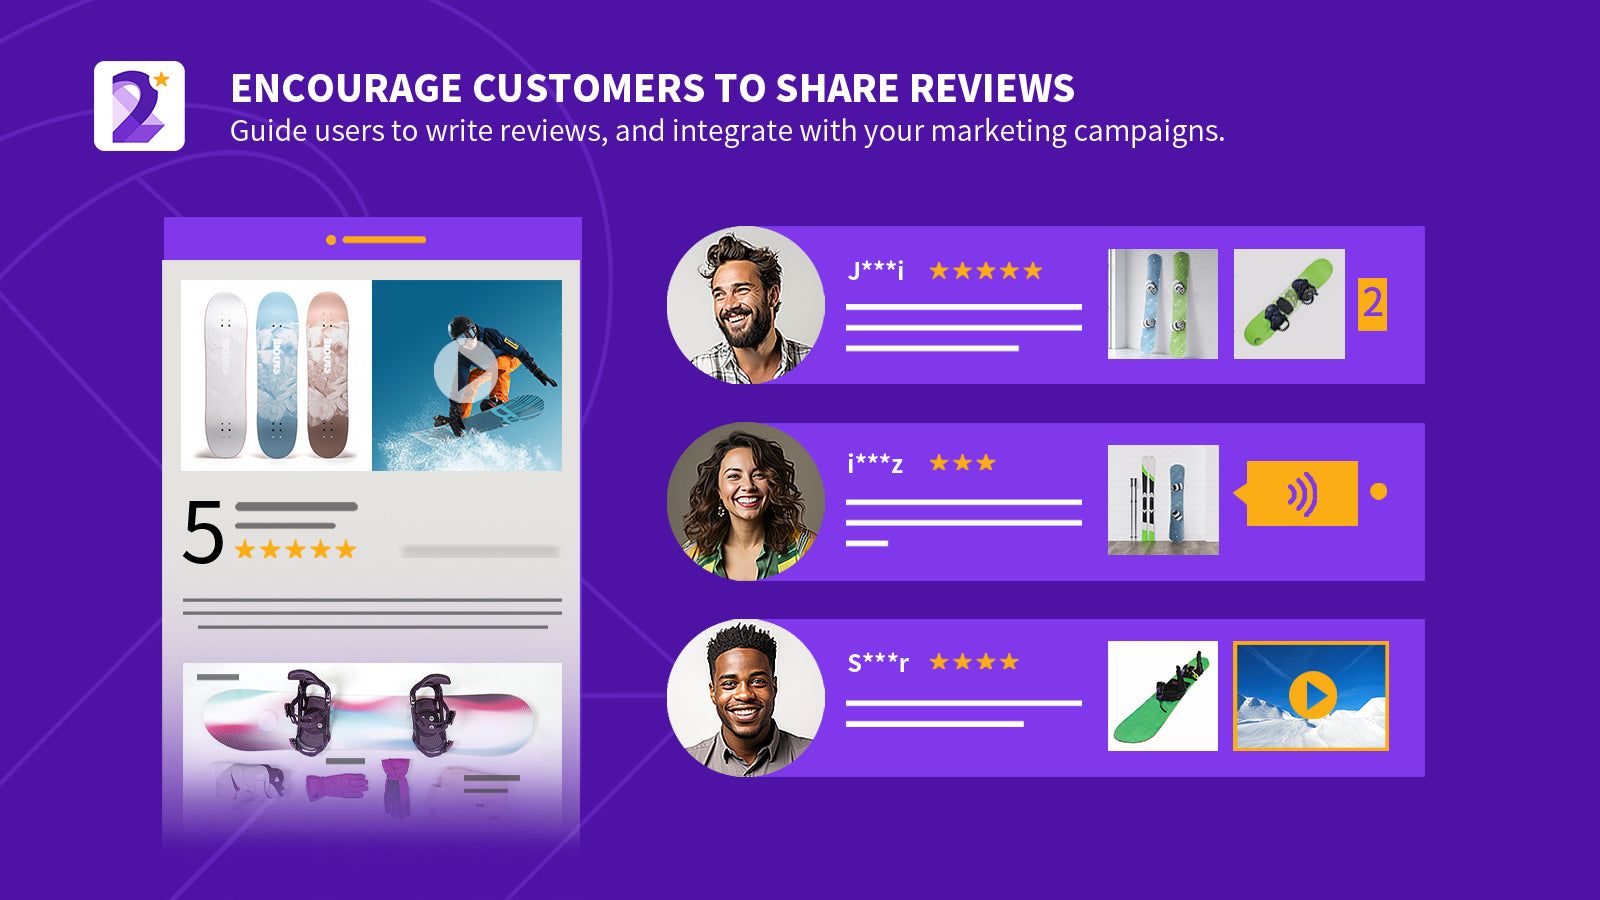 Encourage customers to share reviews